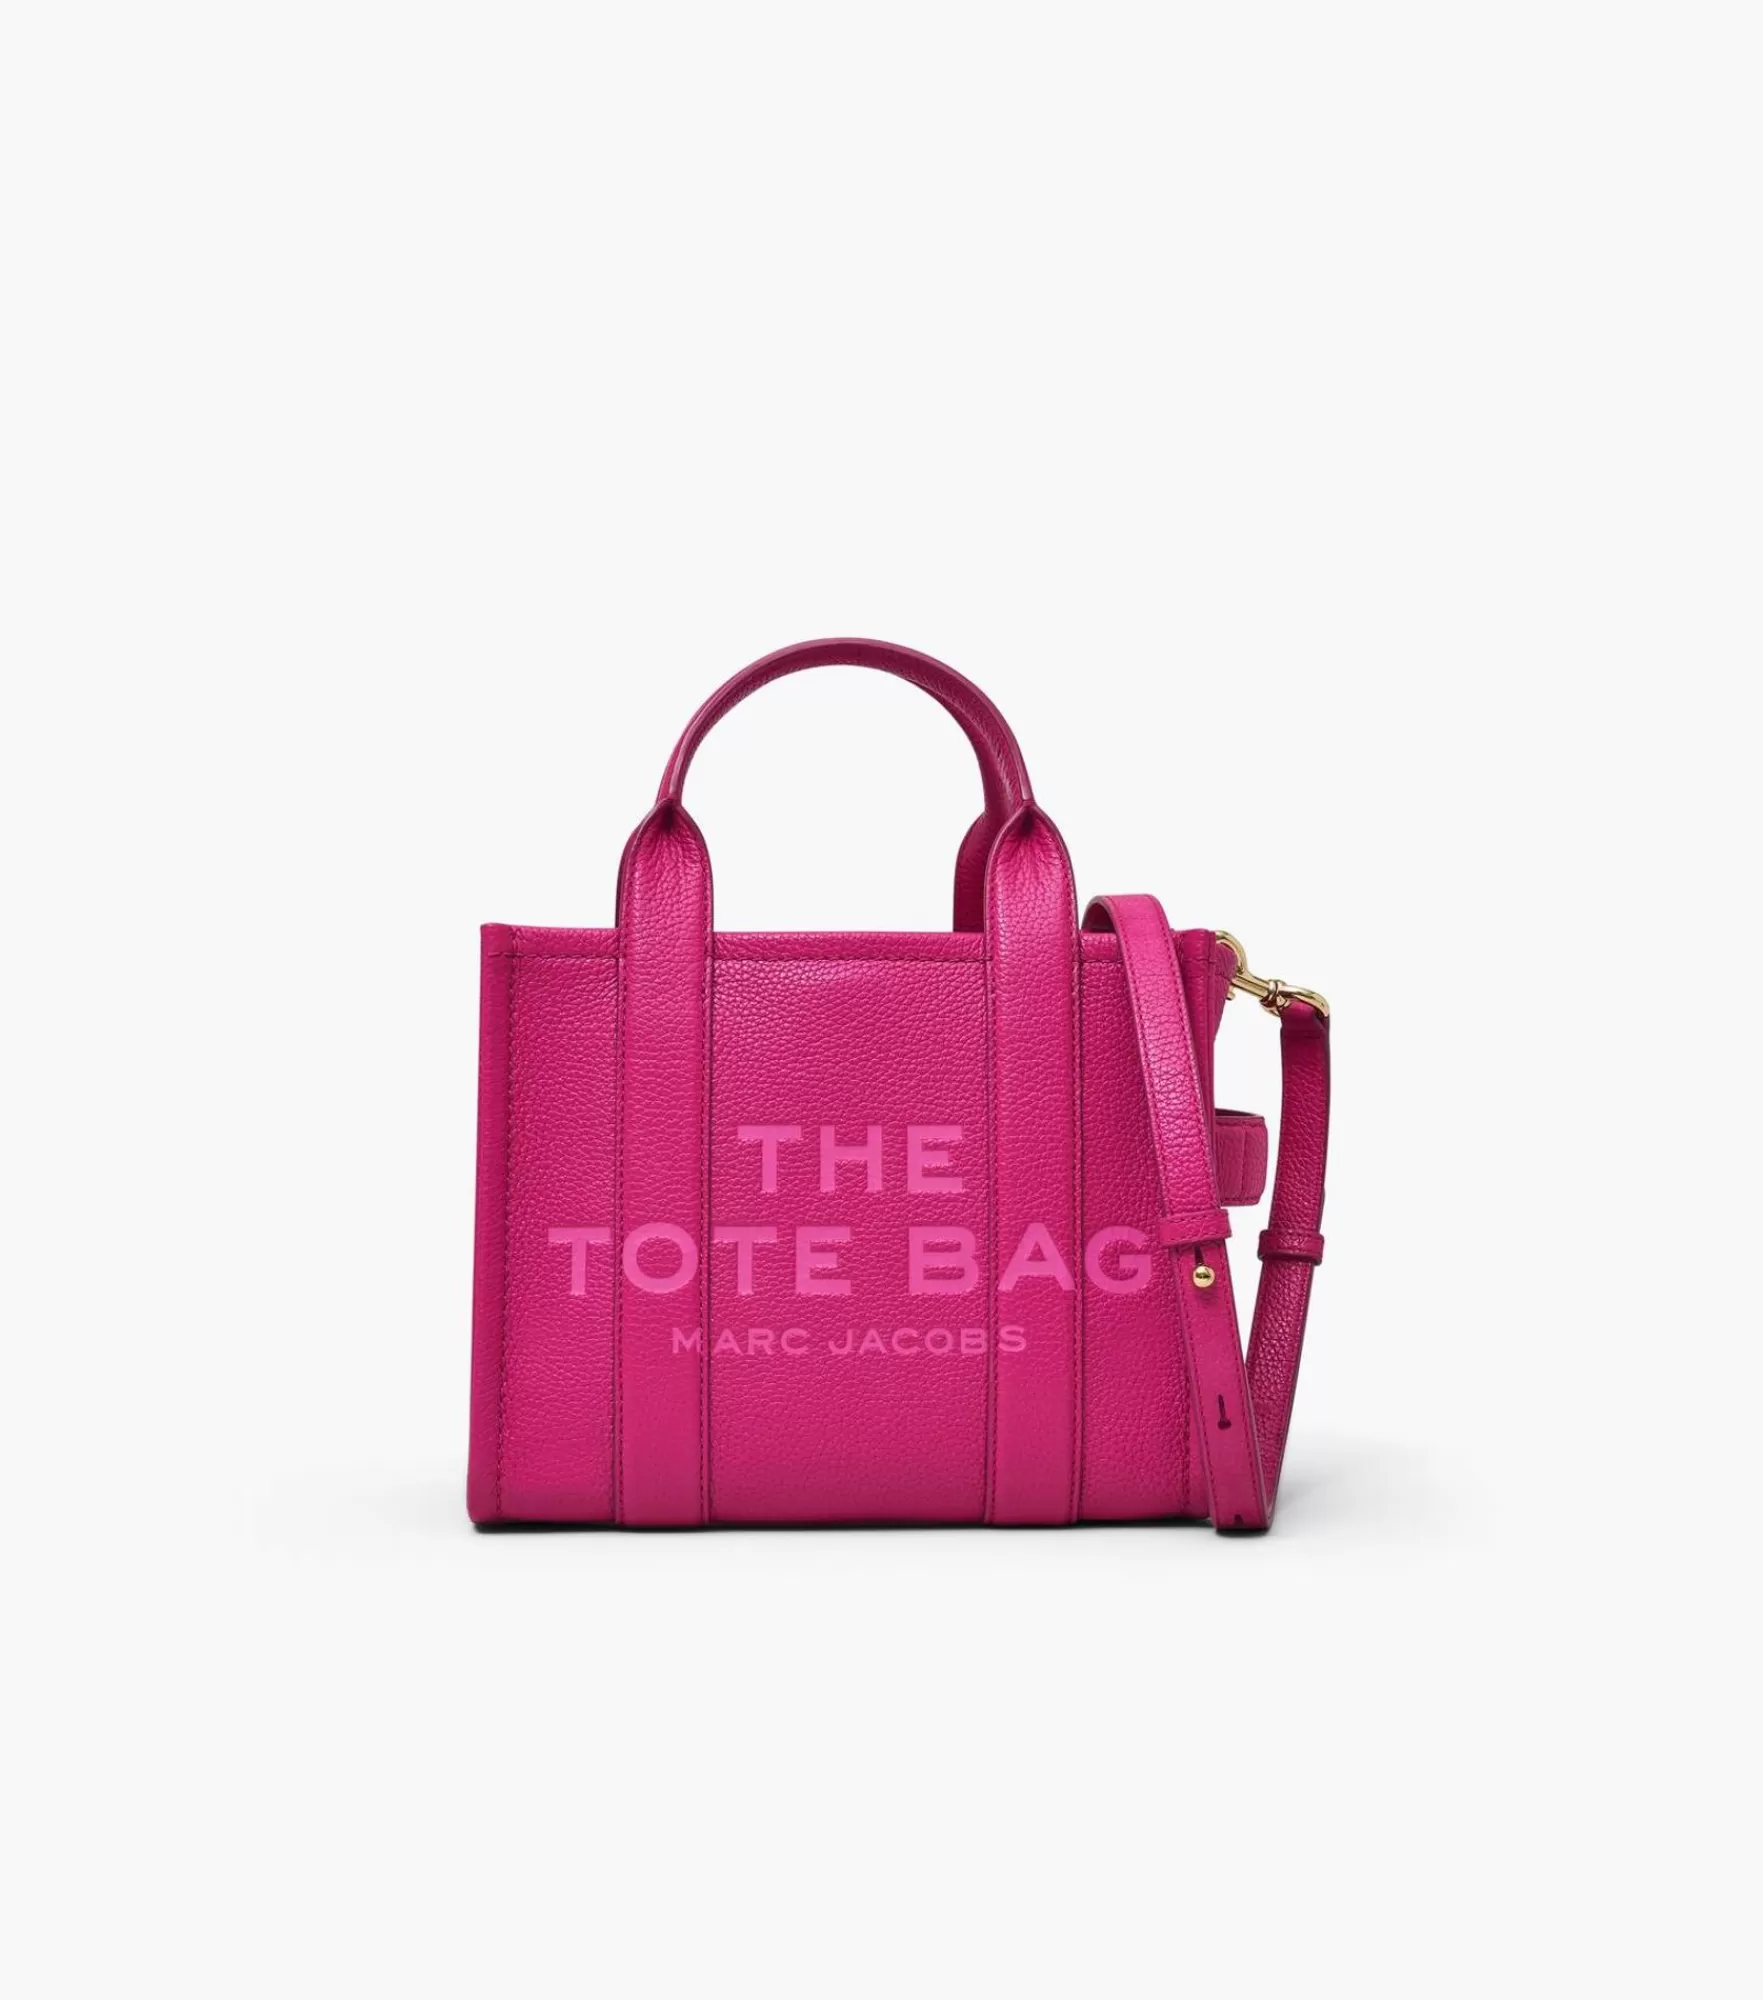 Marc Jacobs The Leather Small Tote Bag | Sacs Bandoulière